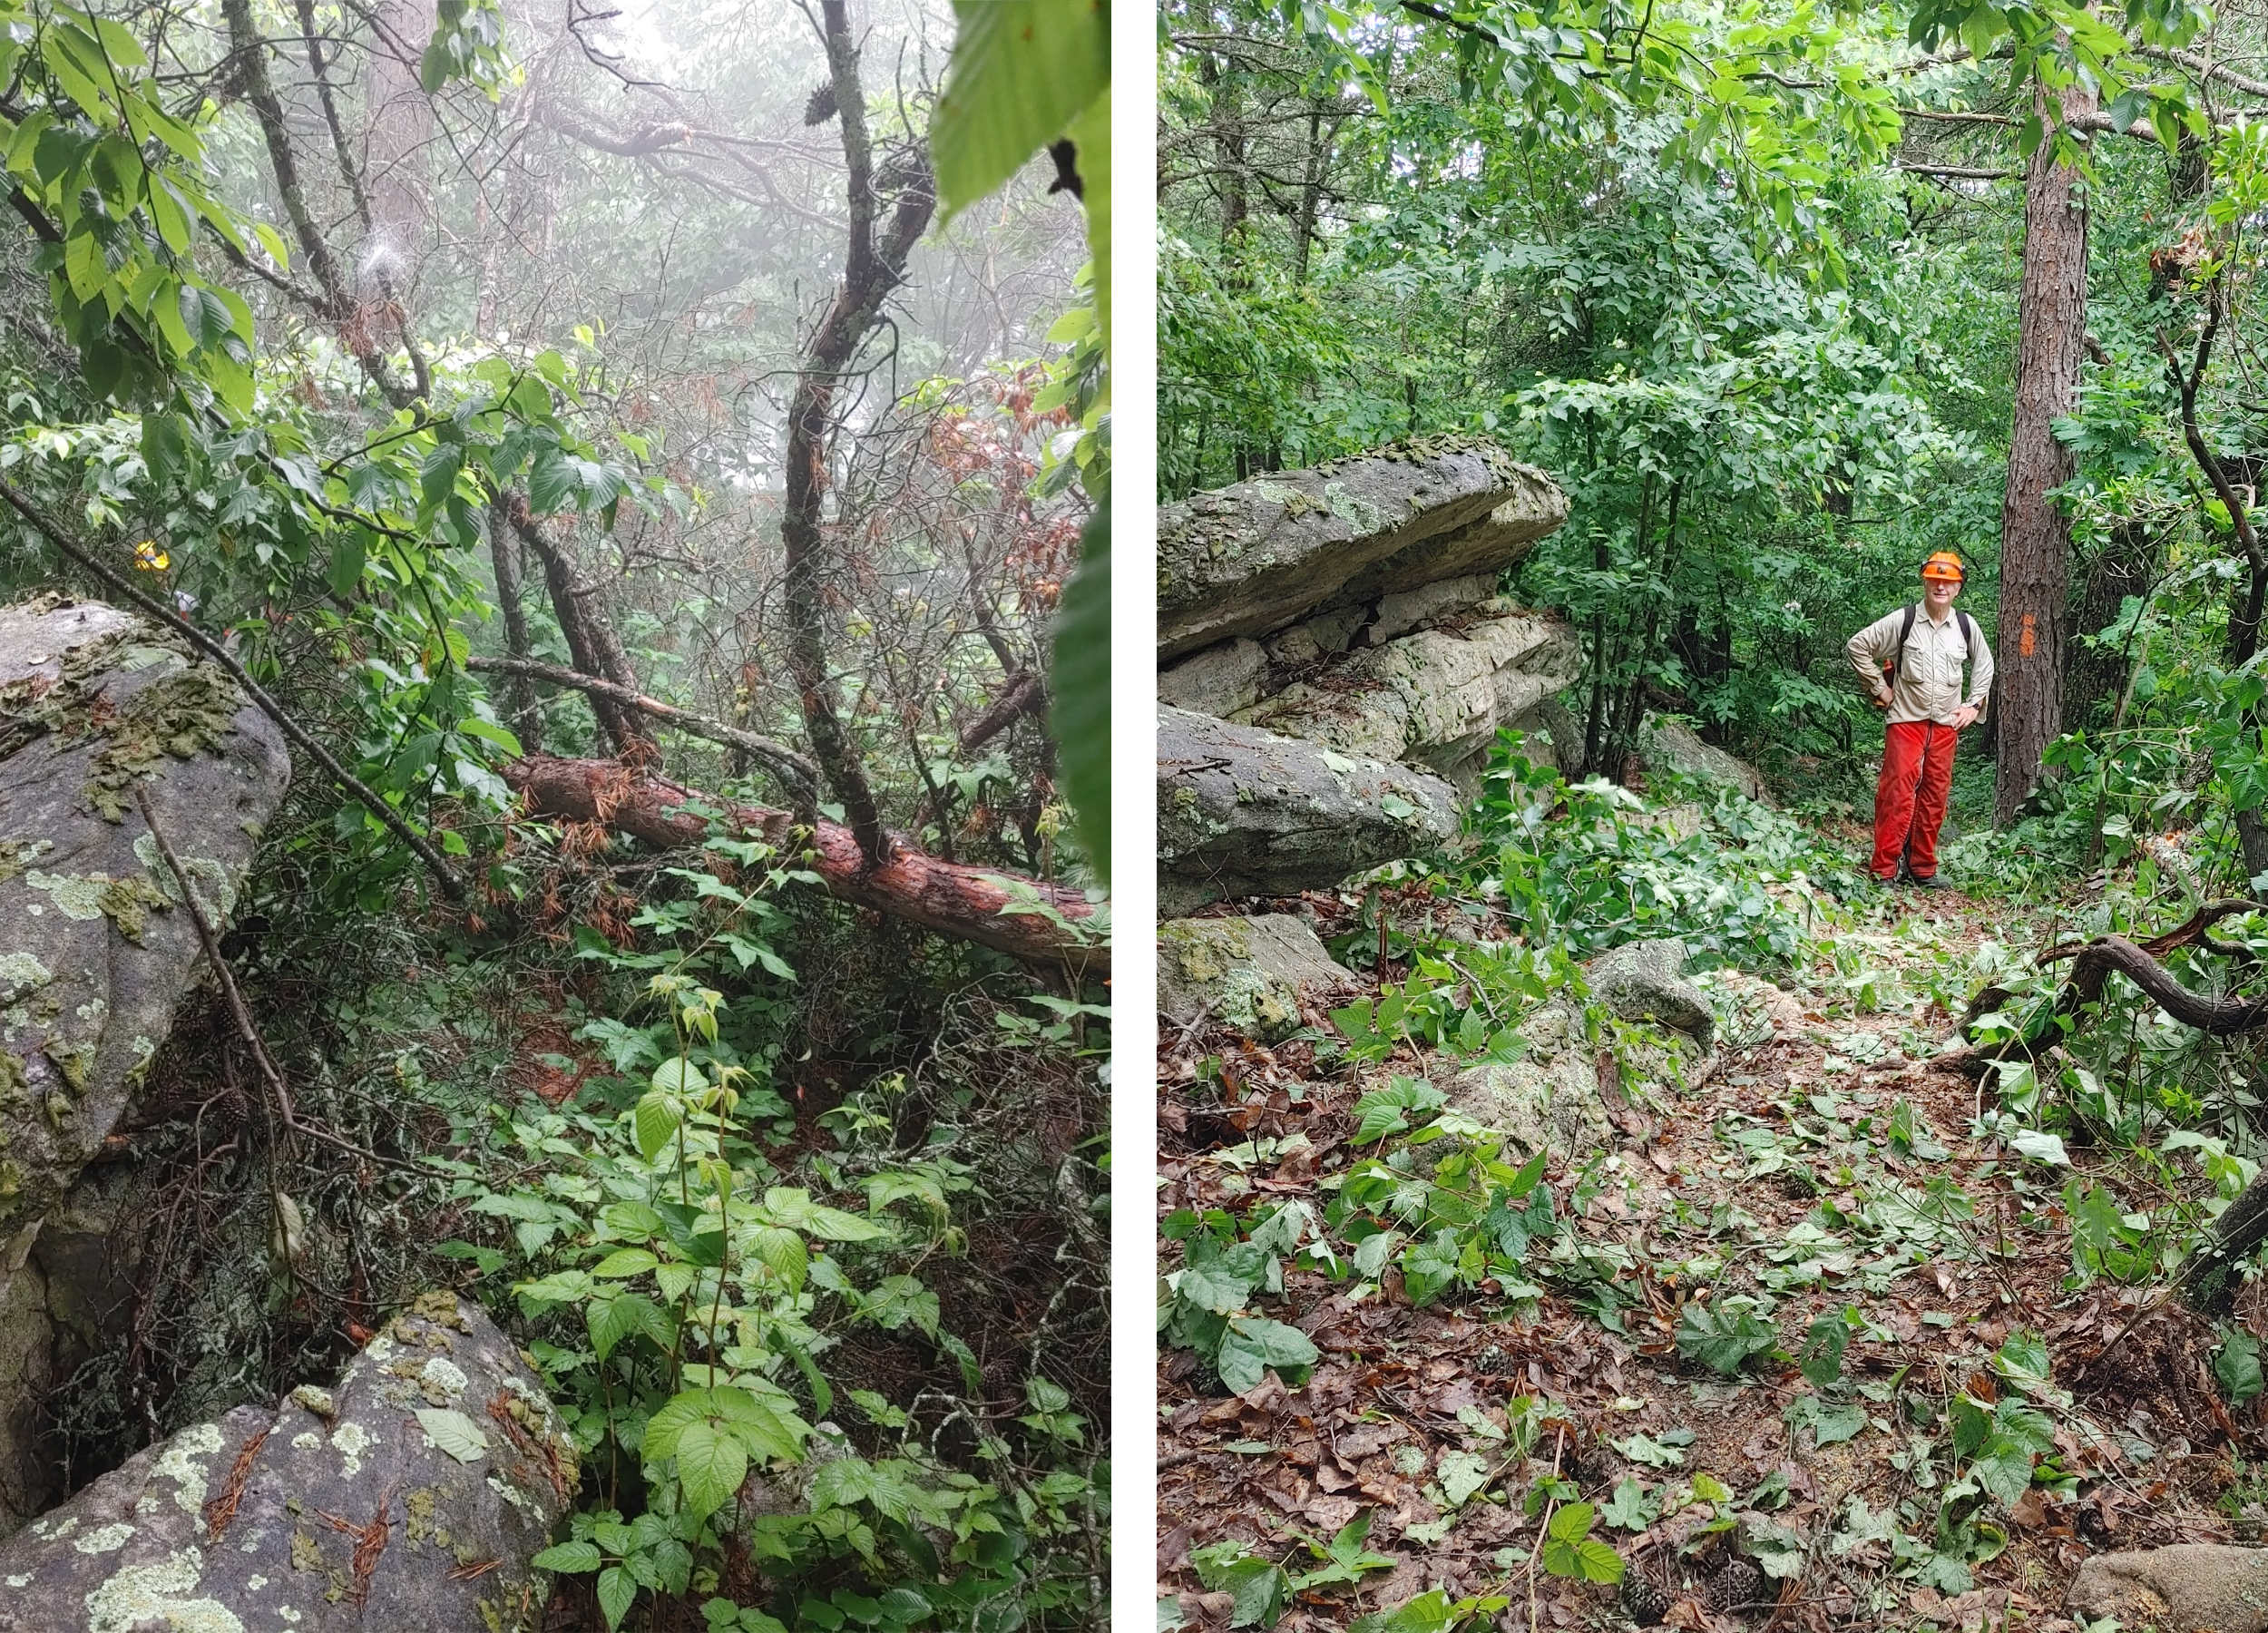 The large tree on Kerns Mountain, before and after Anstr Davidson cleared it